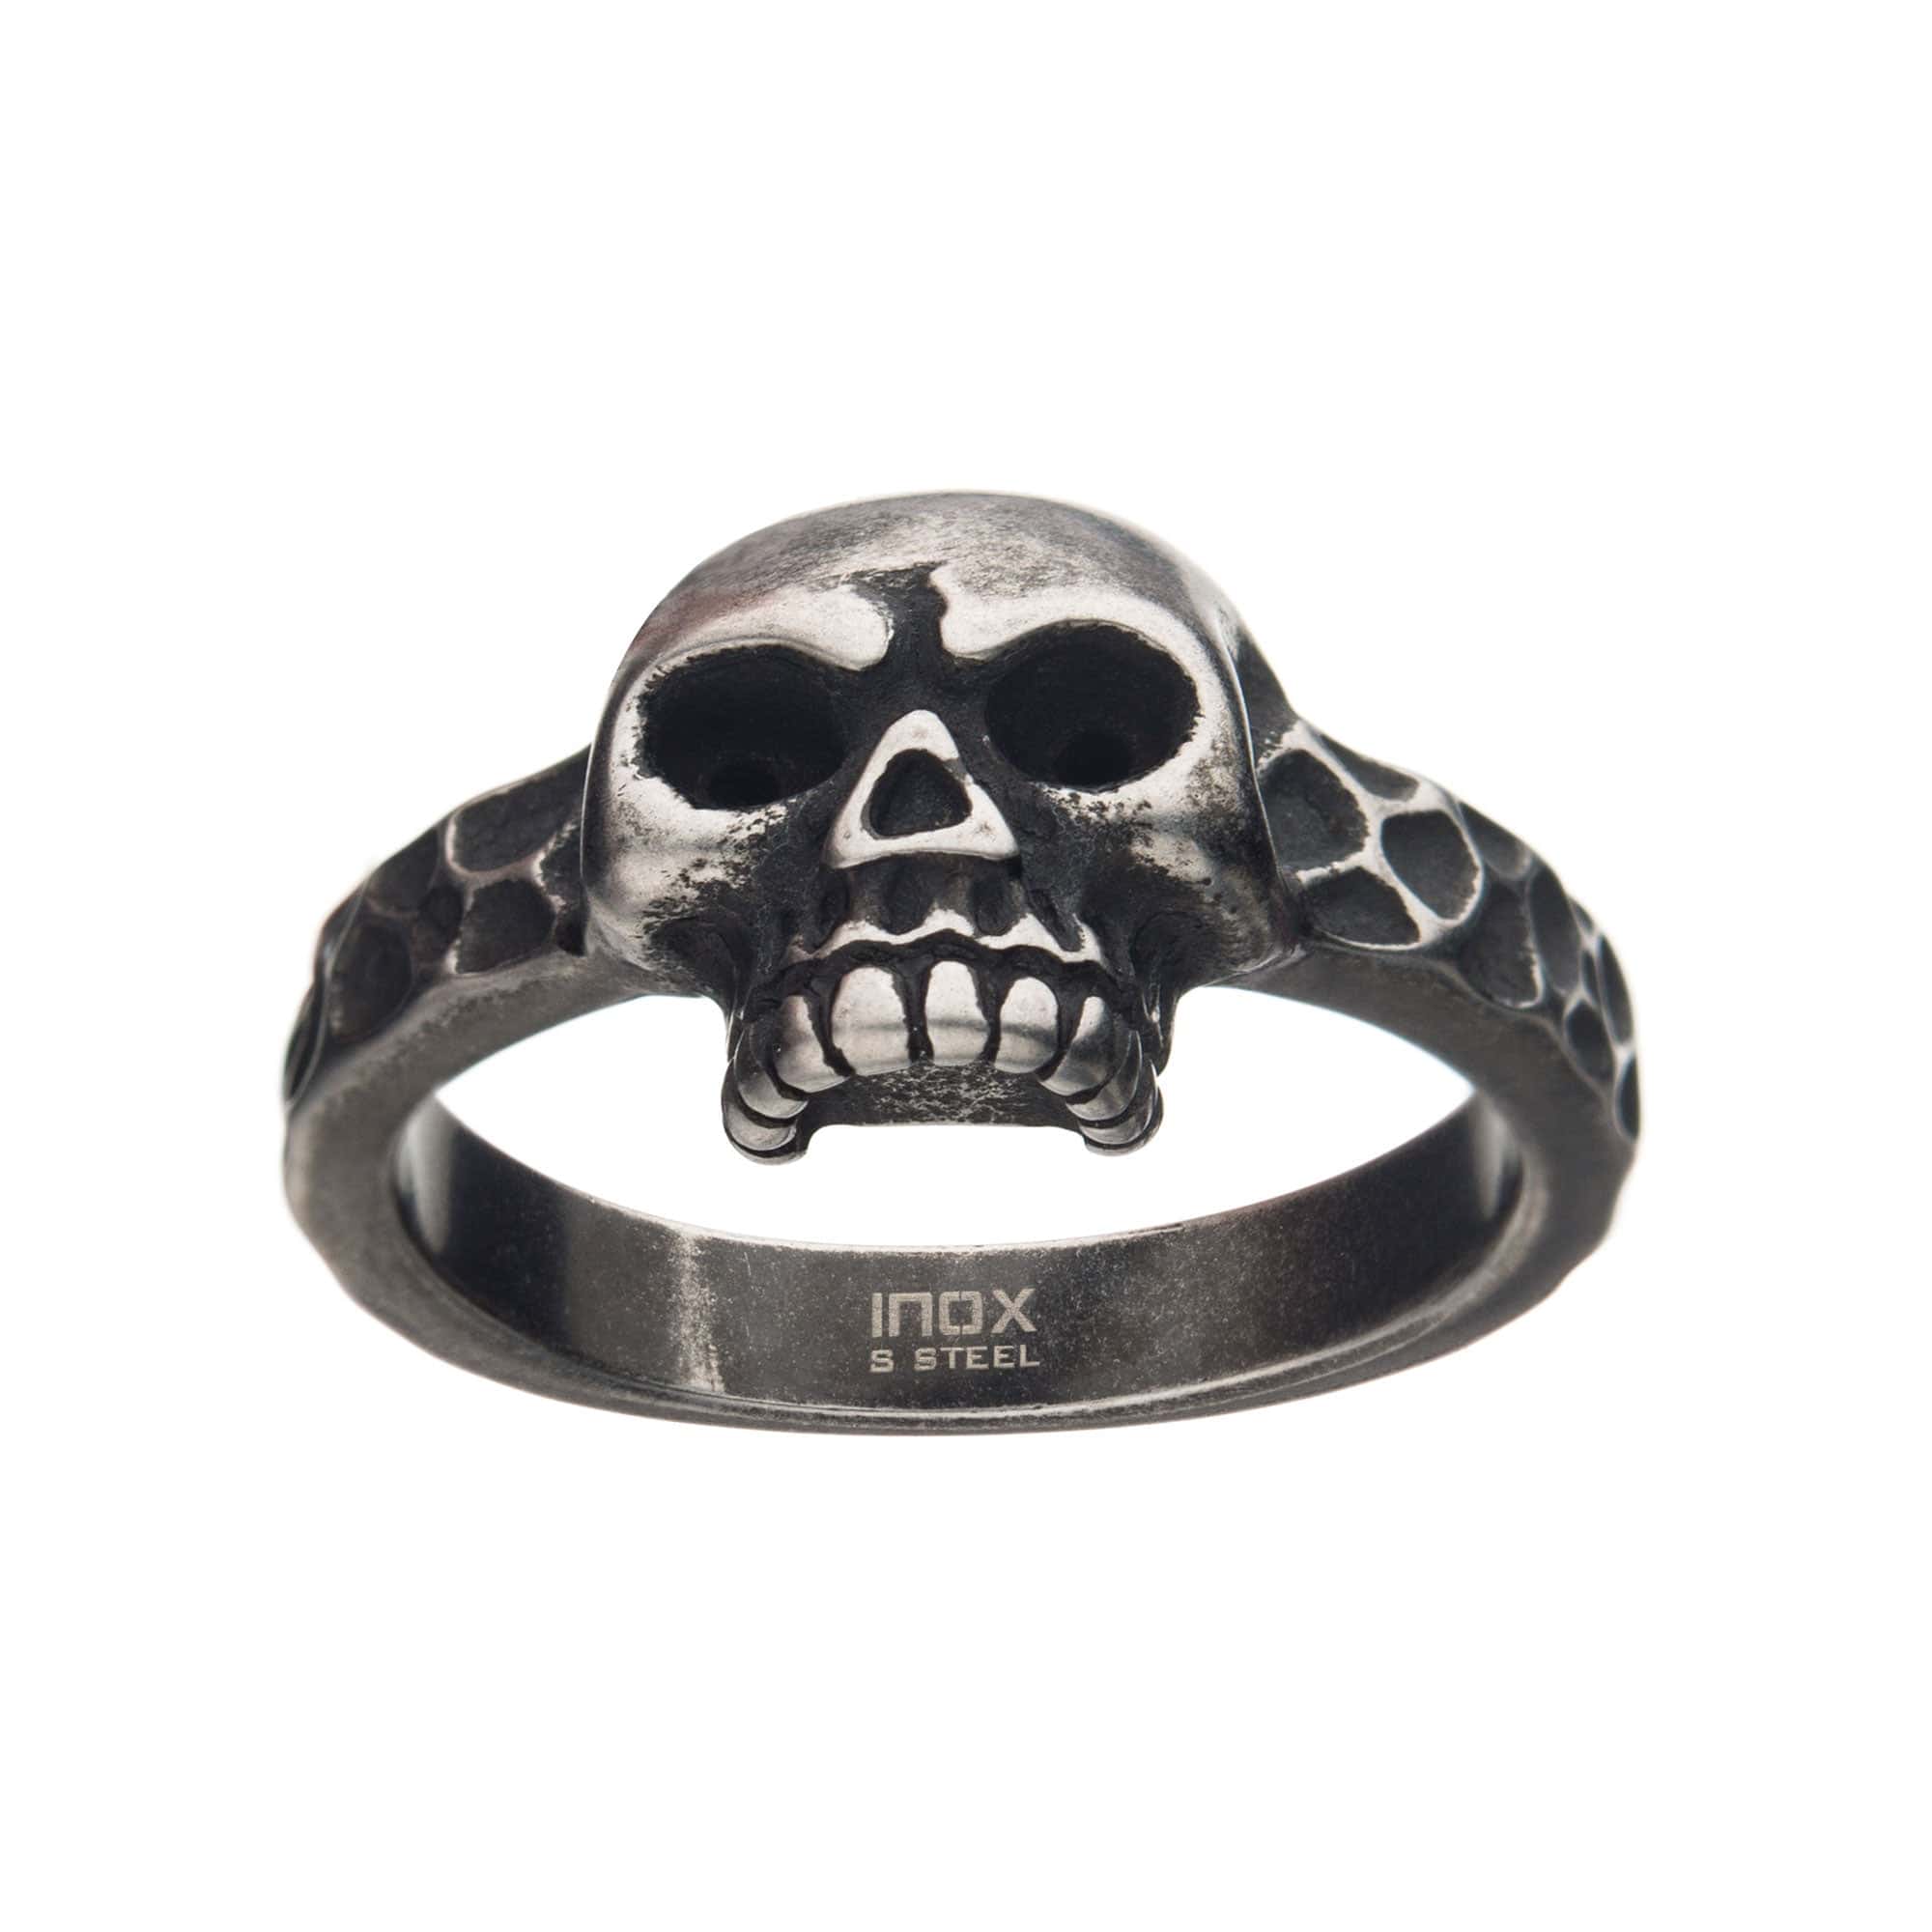 INOX JEWELRY Rings Silver Tone Stainless Steel Antique Finish Gunmetal Skull Ring